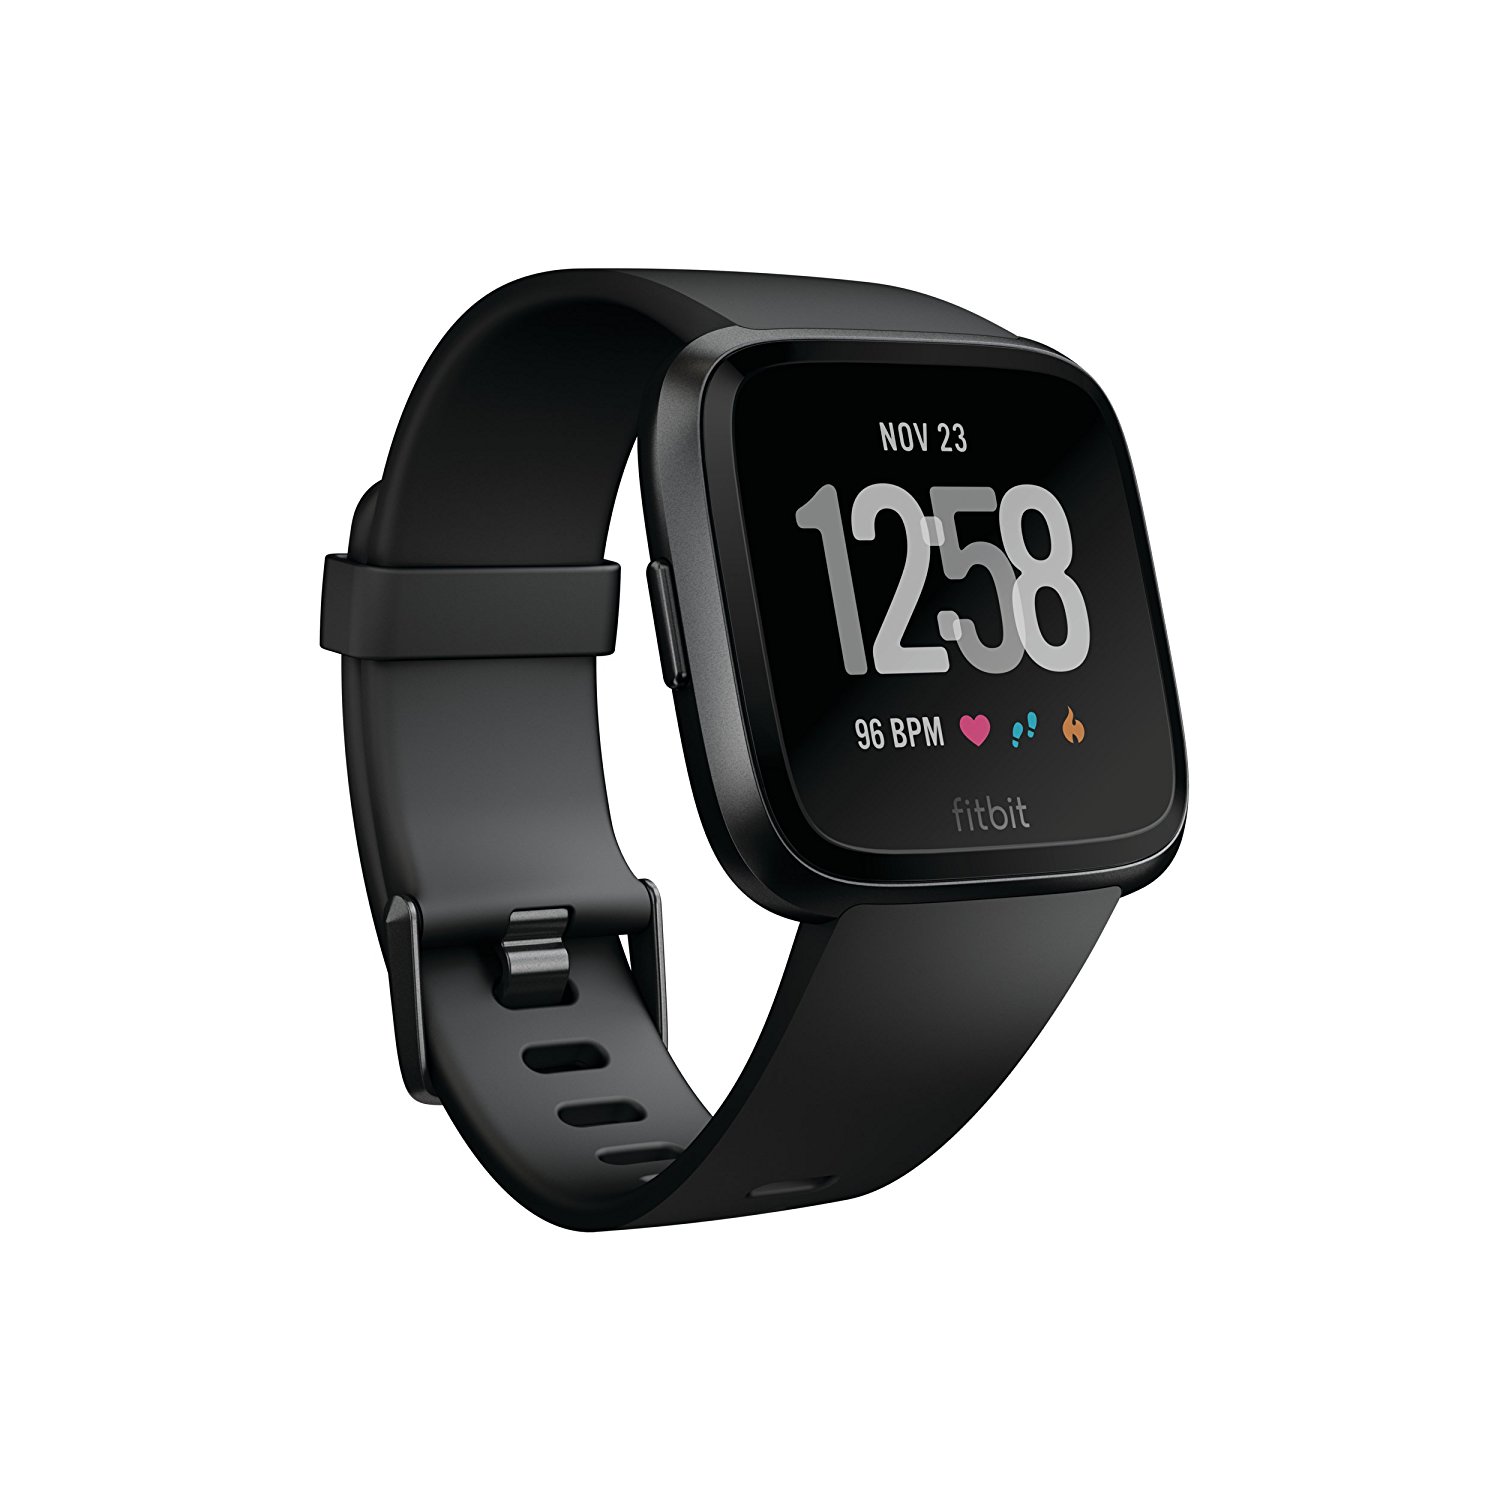 Fitbit Versa Smartwatch Photos Image And Wallpaper Mouthshut